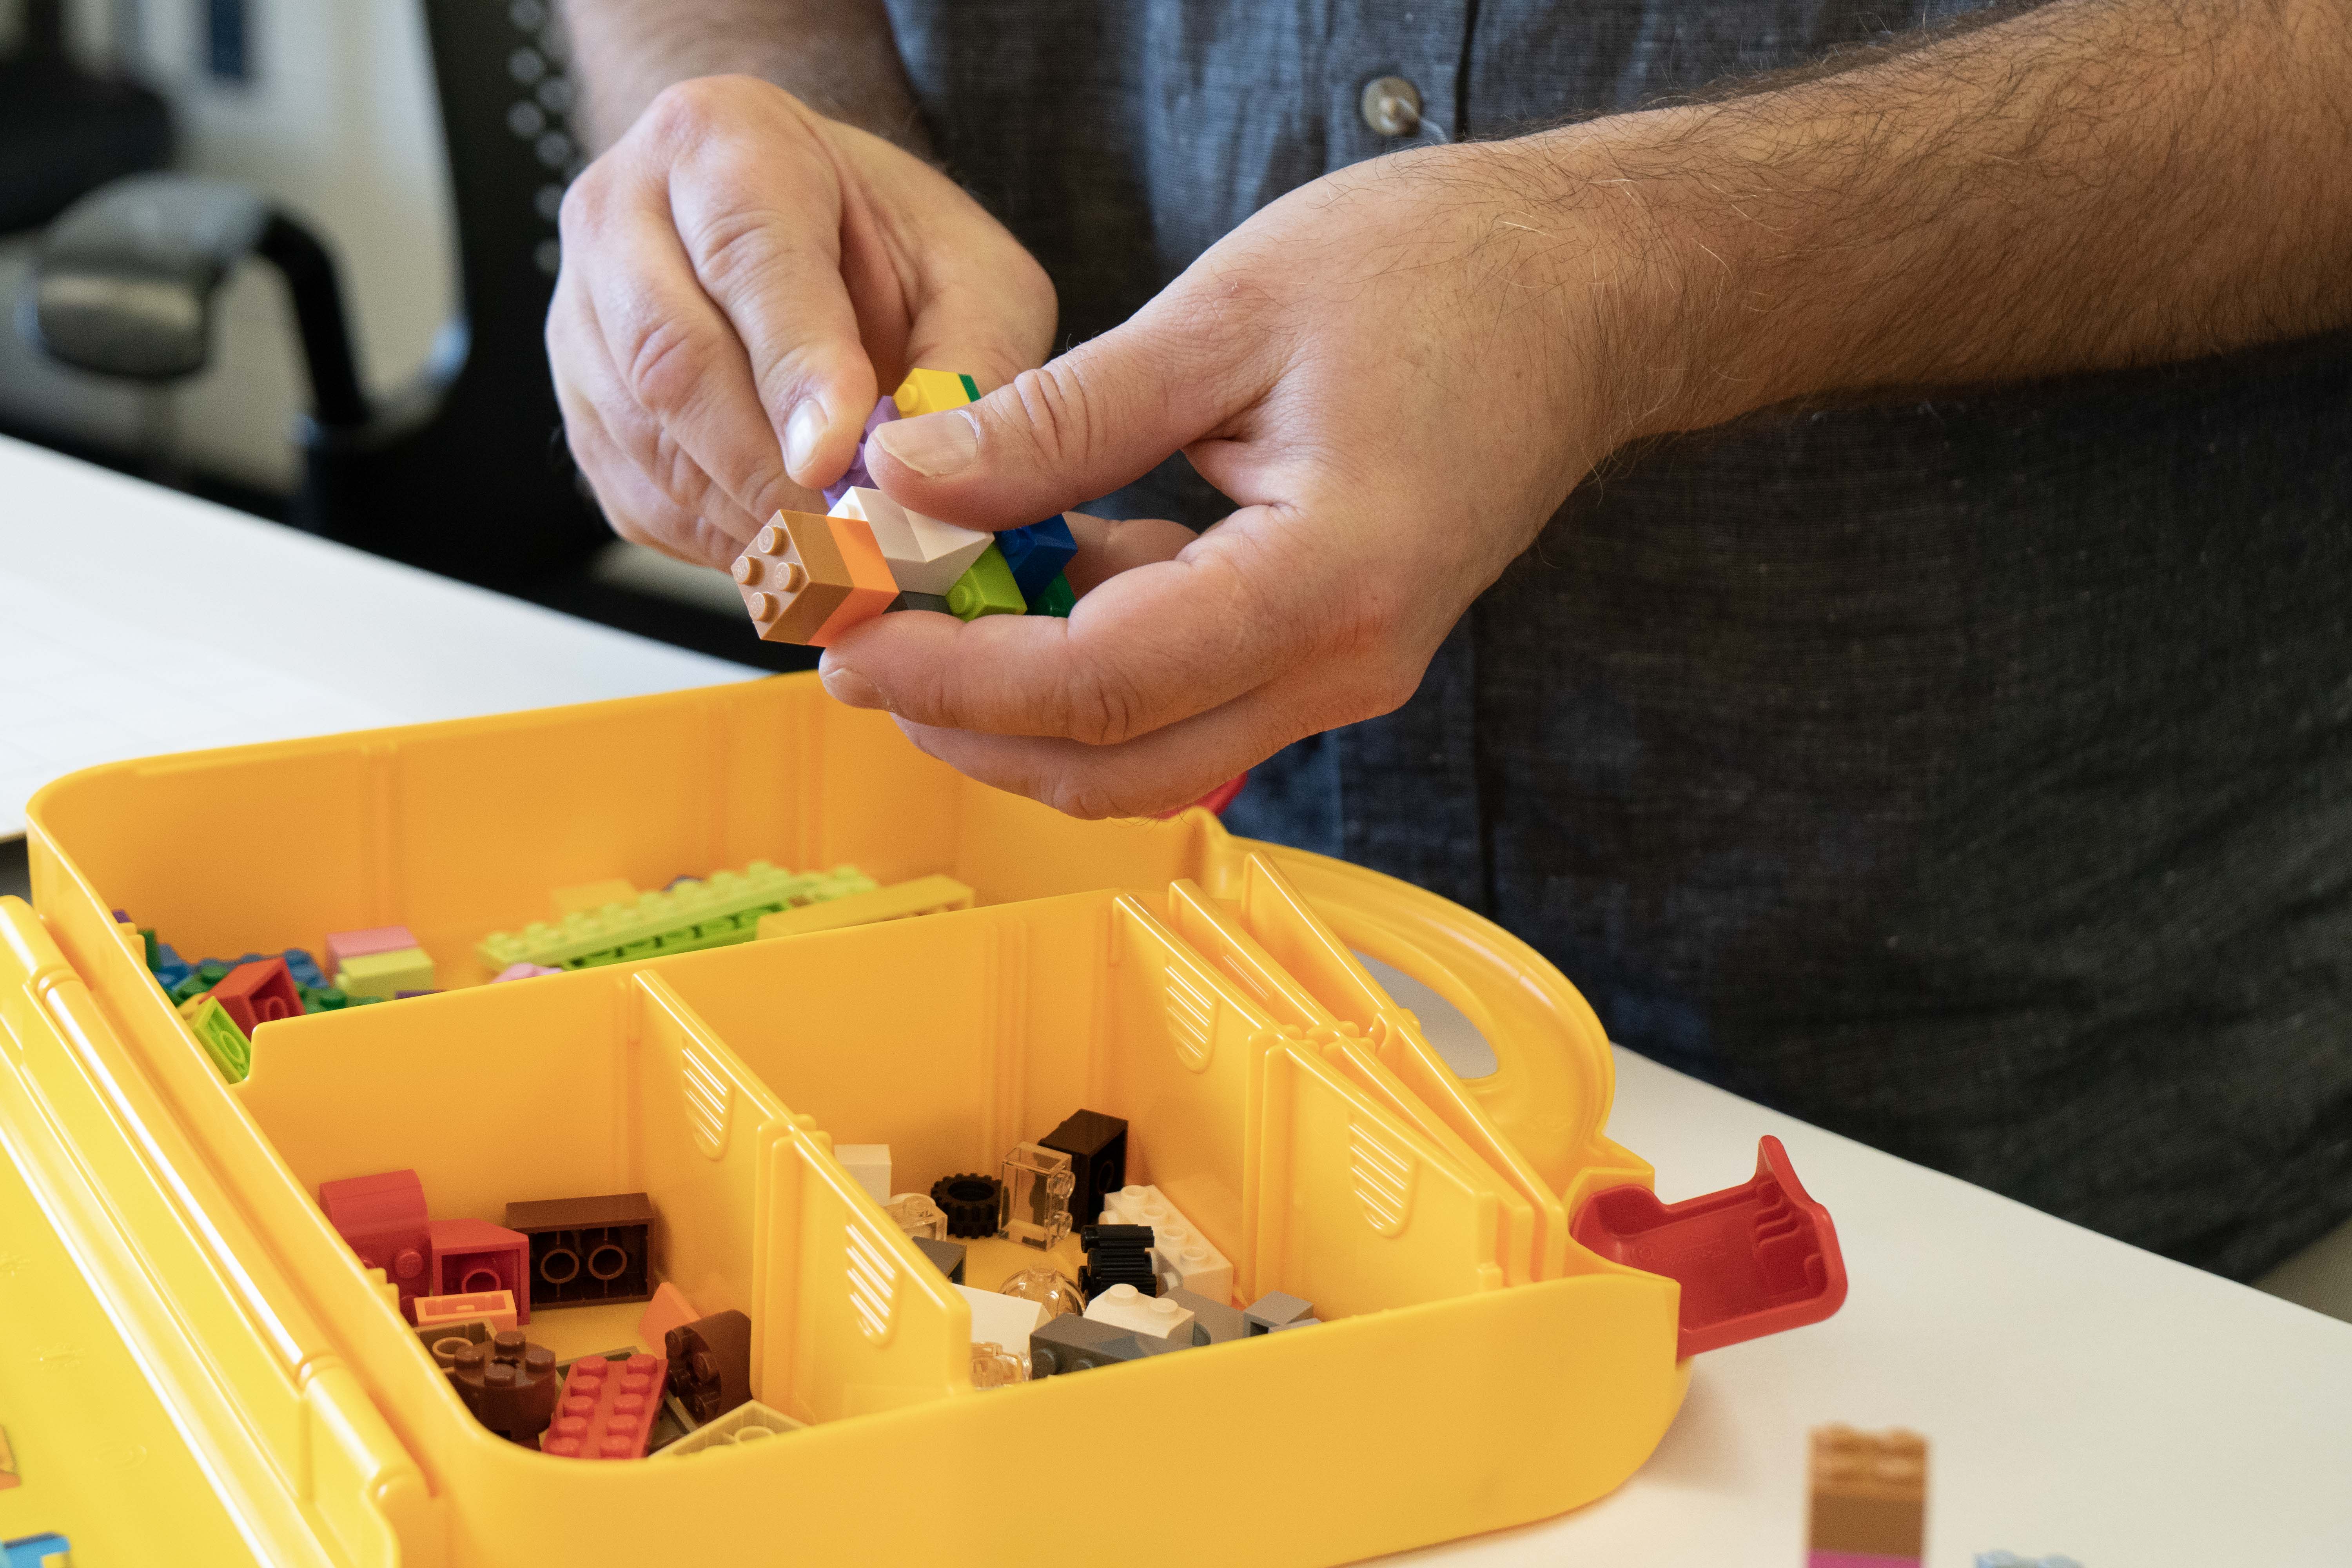 Paul Yanko builds a LEGO structure